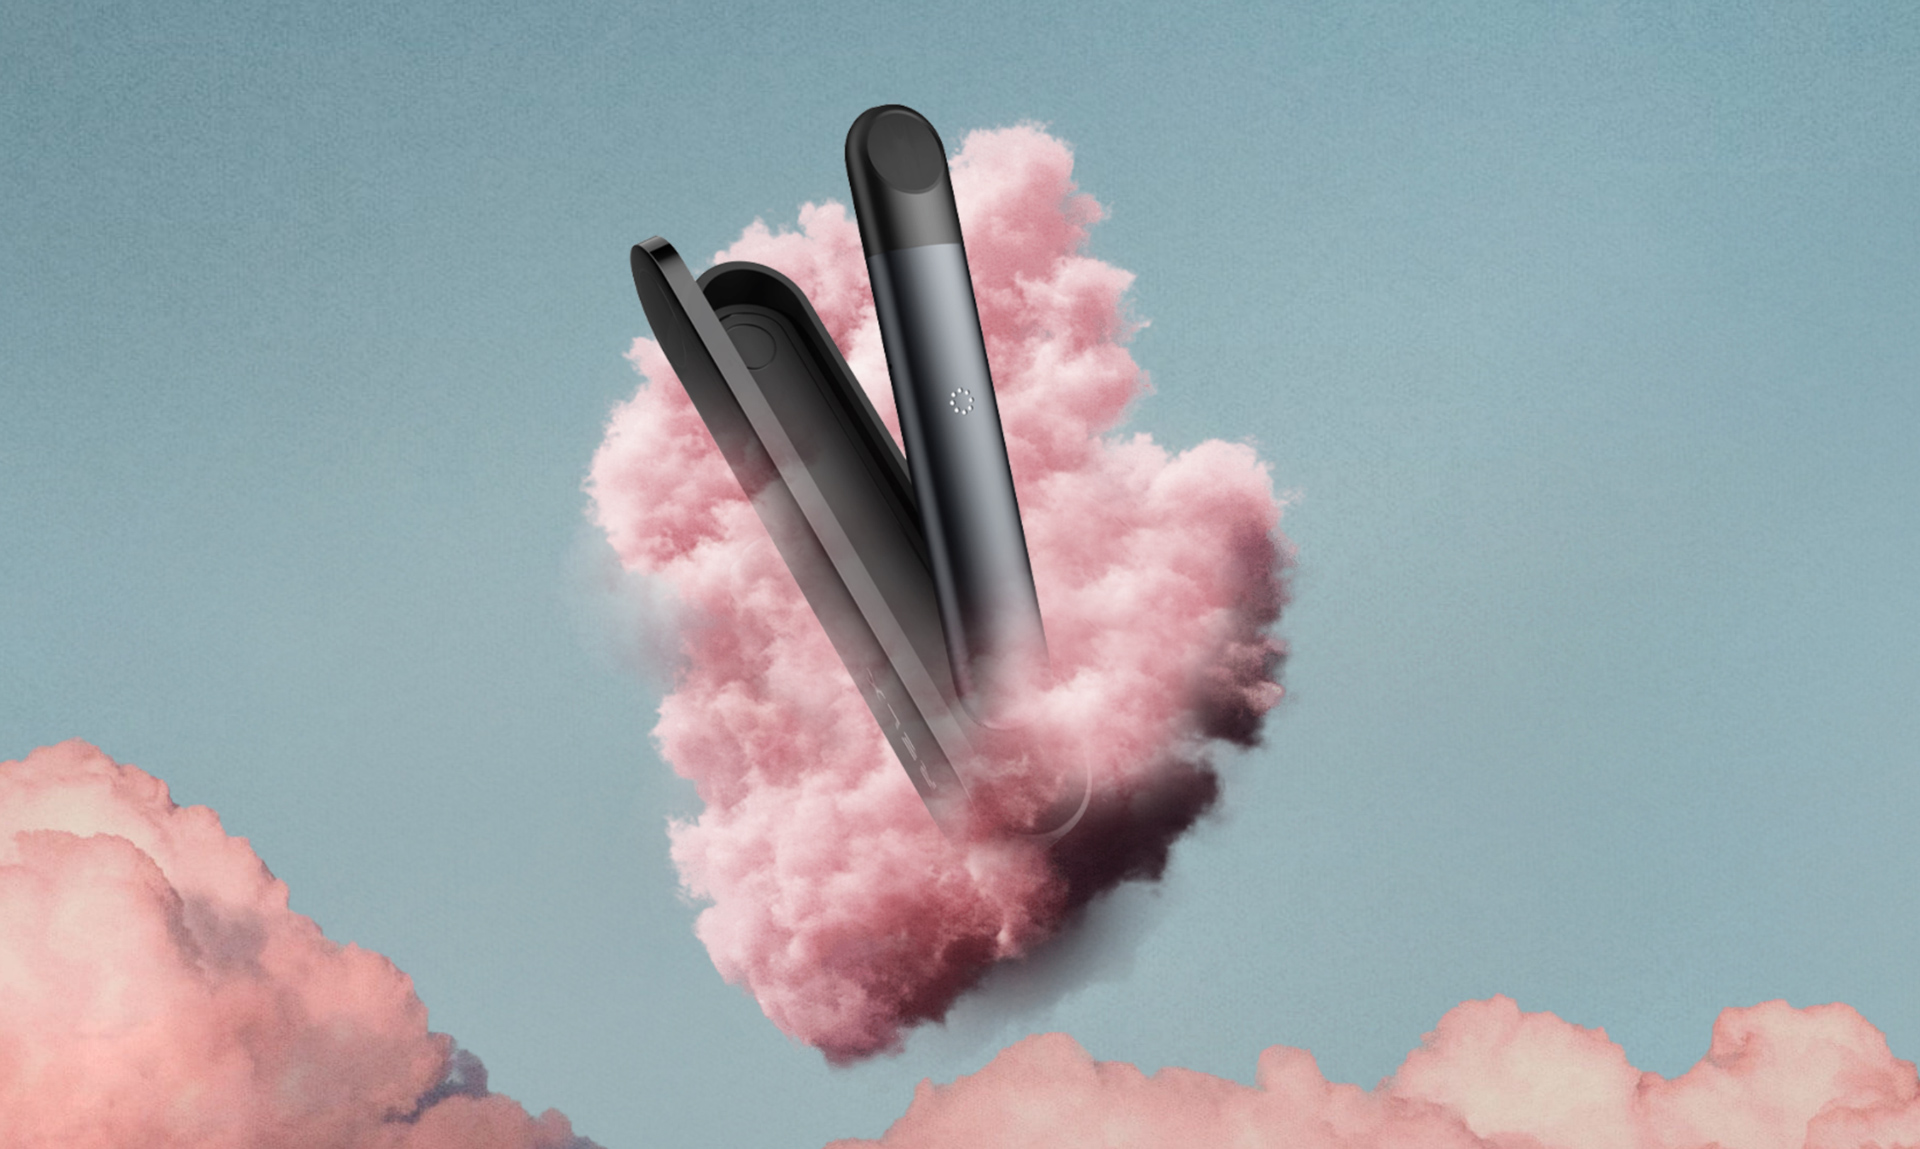 For this Funky Vape project, we have created a vintage brand image with surrealistic style to differentiate it from other competitors in the market.